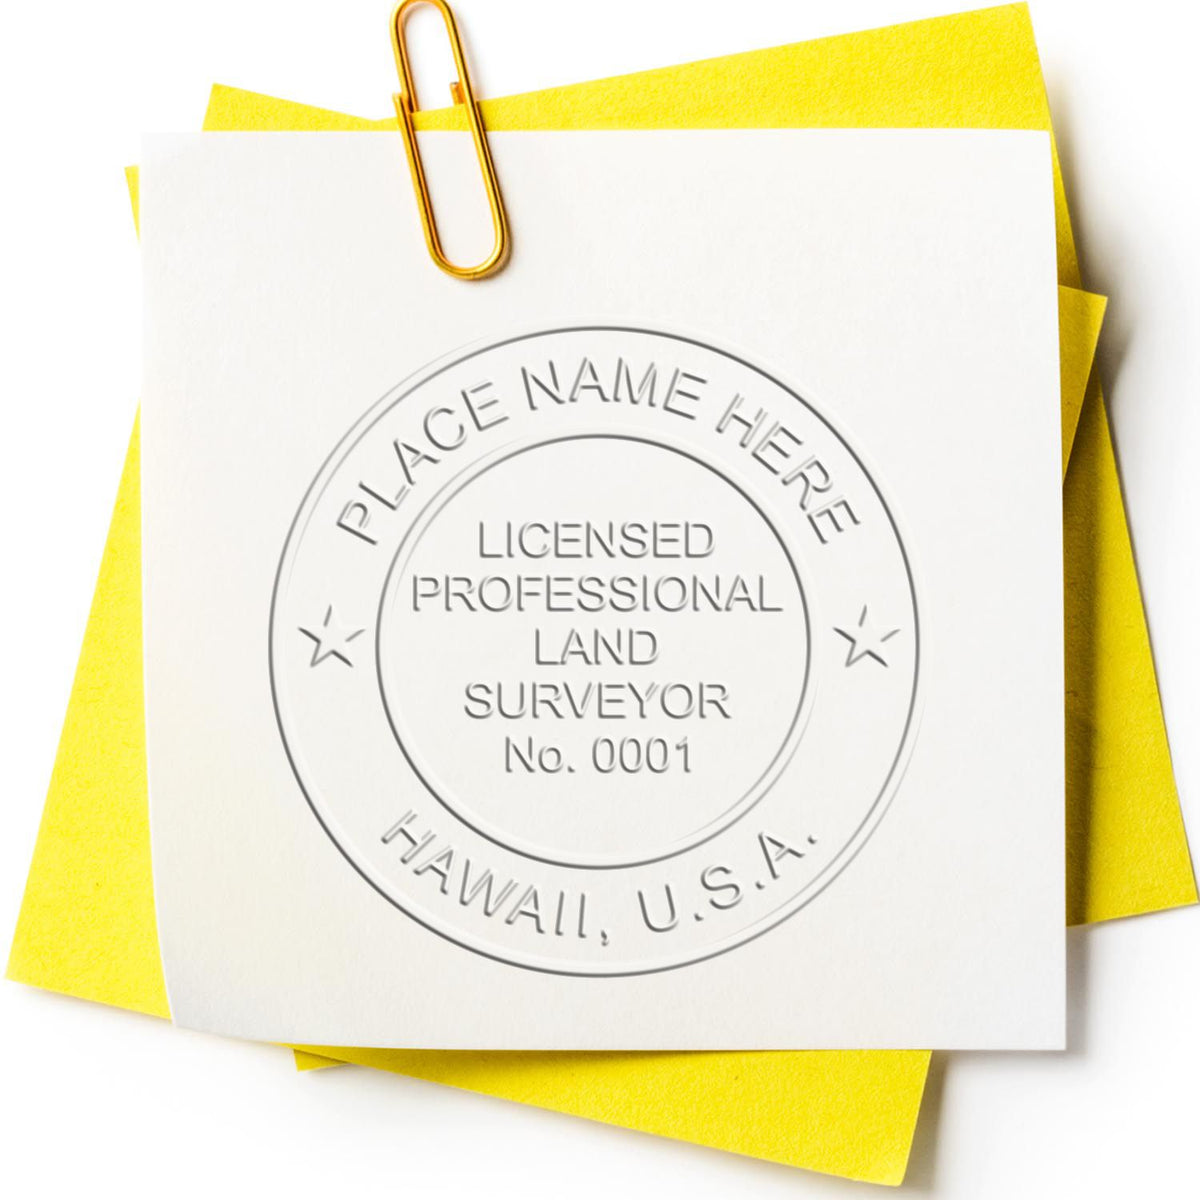 A stamped impression of the Handheld Hawaii Land Surveyor Seal in this stylish lifestyle photo, setting the tone for a unique and personalized product.